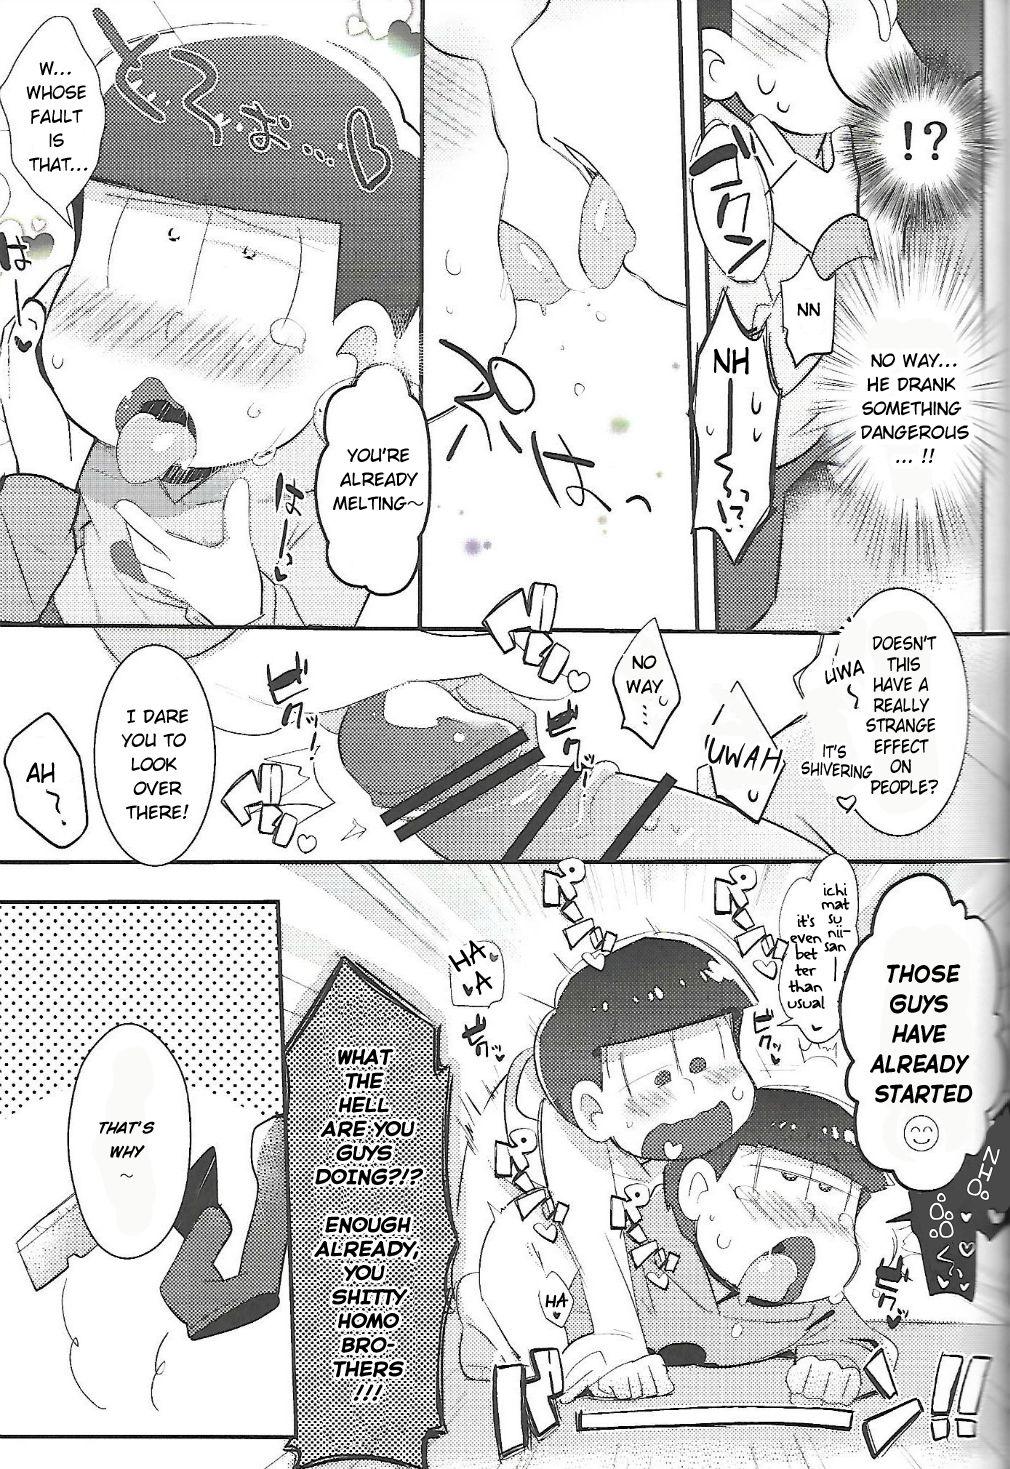 Hot Girls Getting Fucked Let's Secross!! - Osomatsu-san Big Booty - Page 10